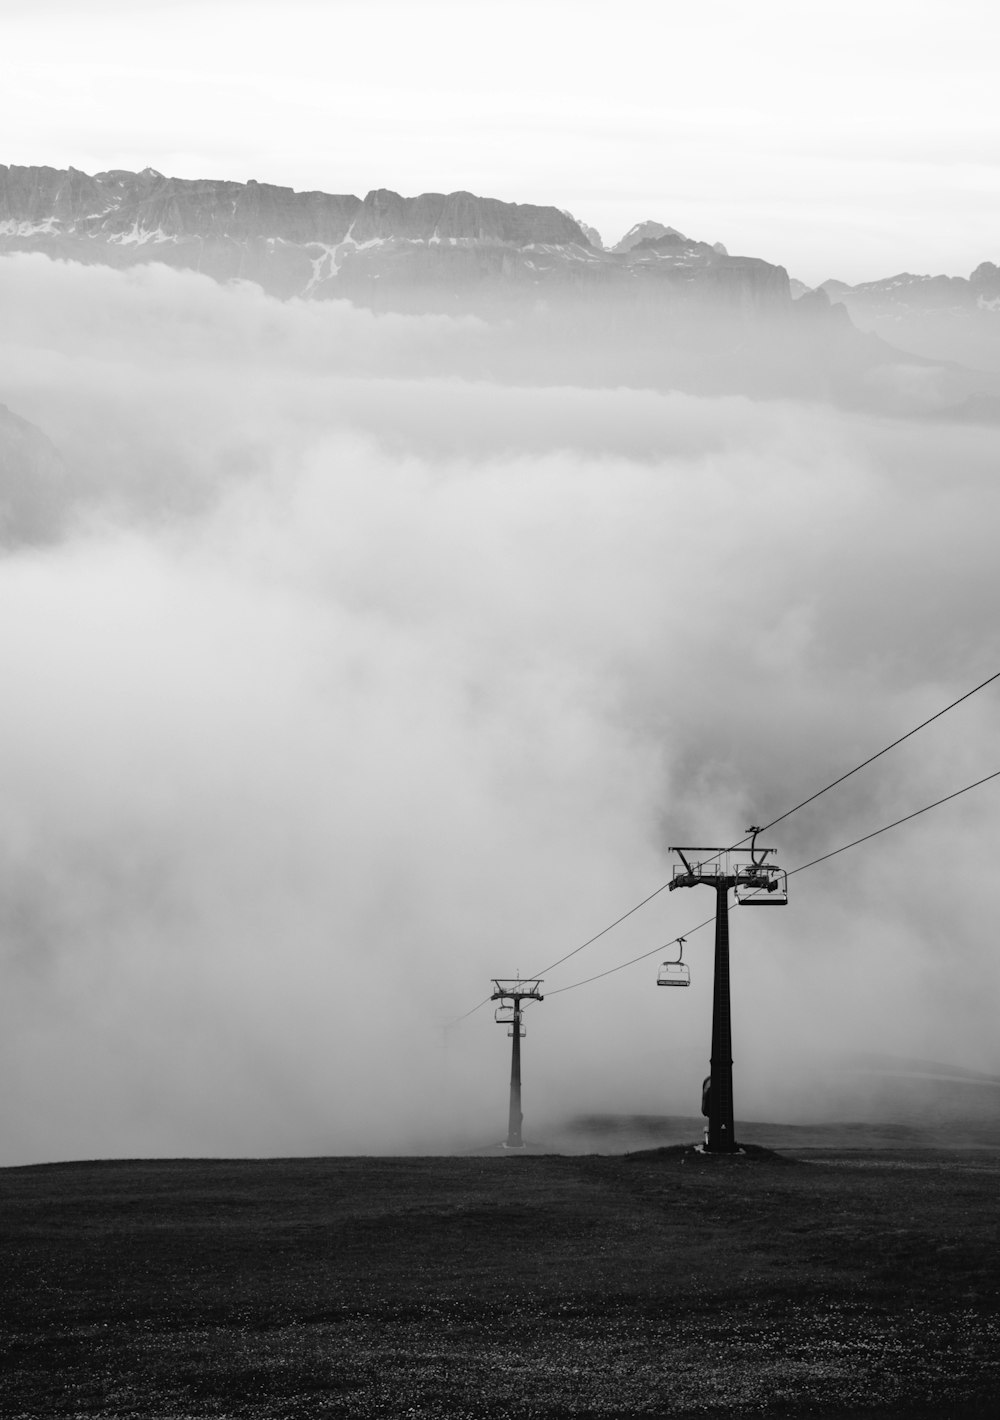 clouds forming near cable cart